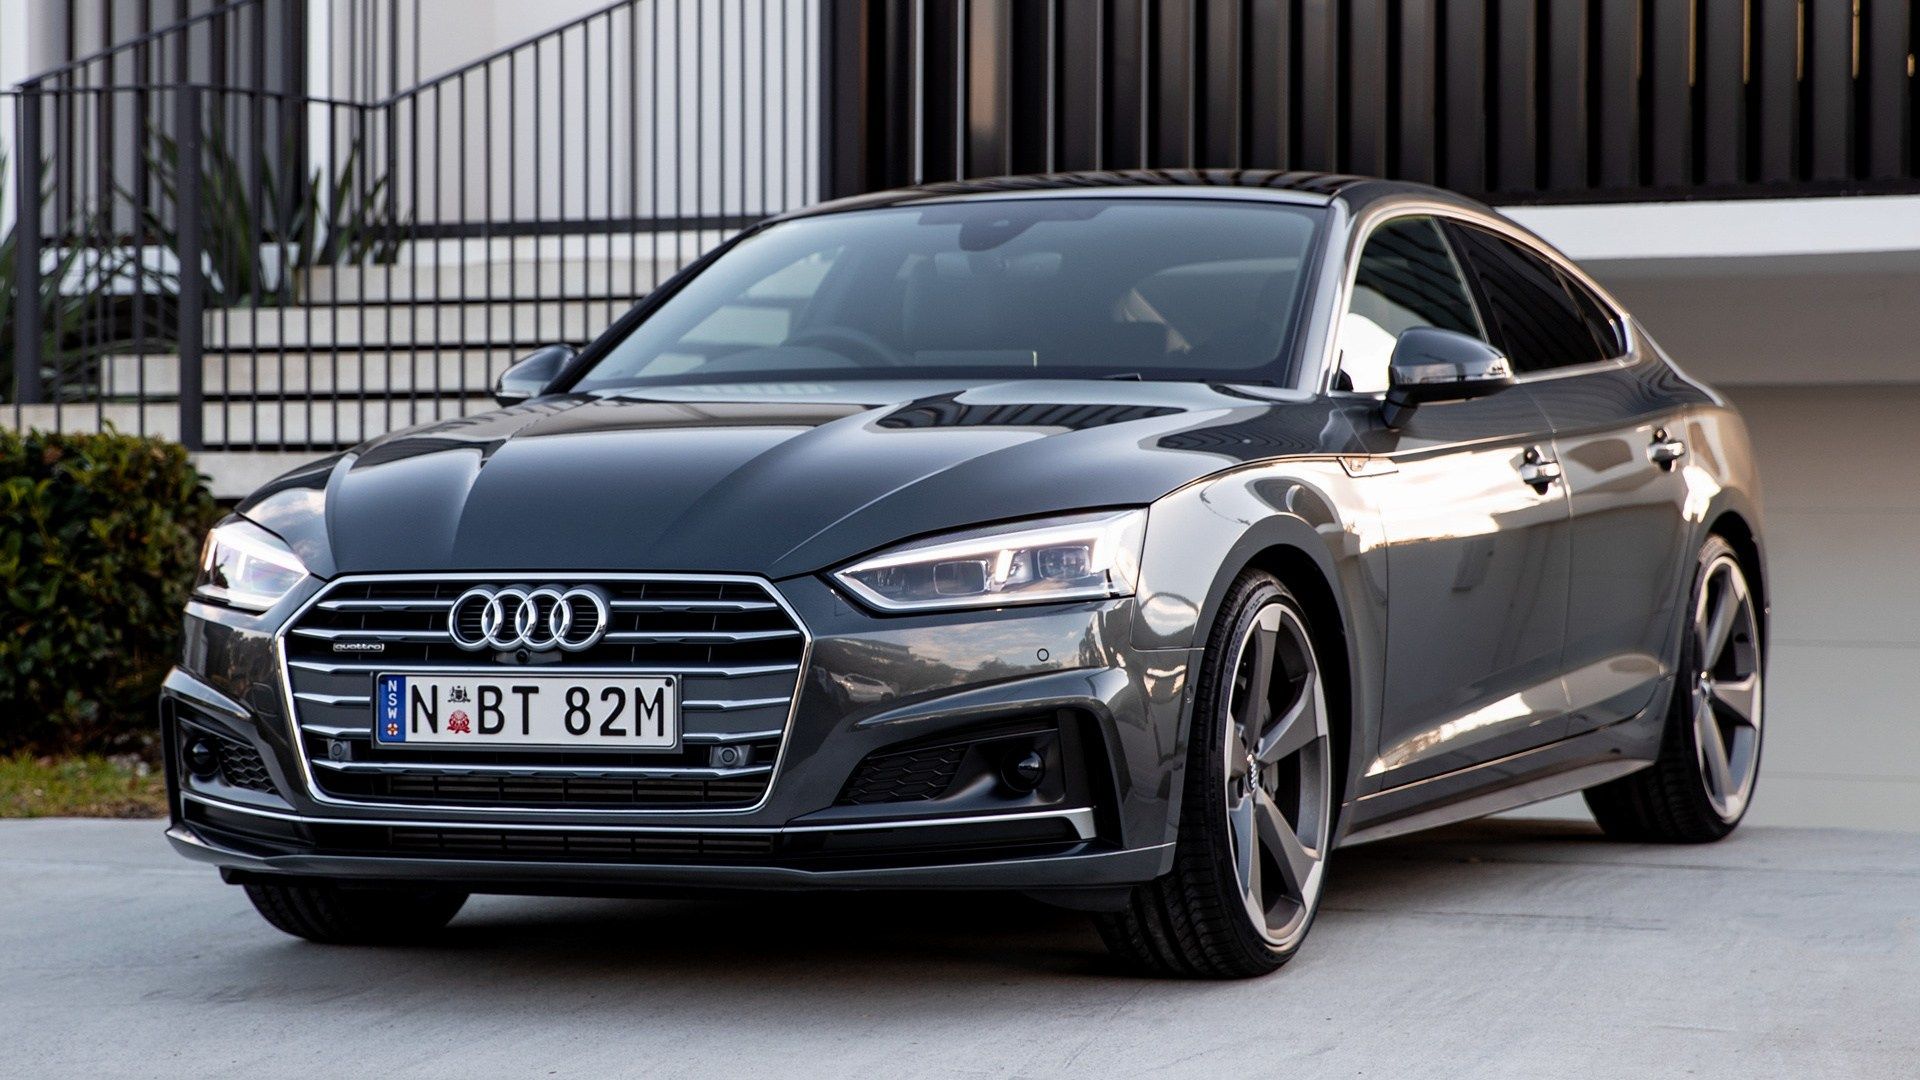 Tag For A5, 2020 Audi A5 Coupe Test Drive Today Middle East S